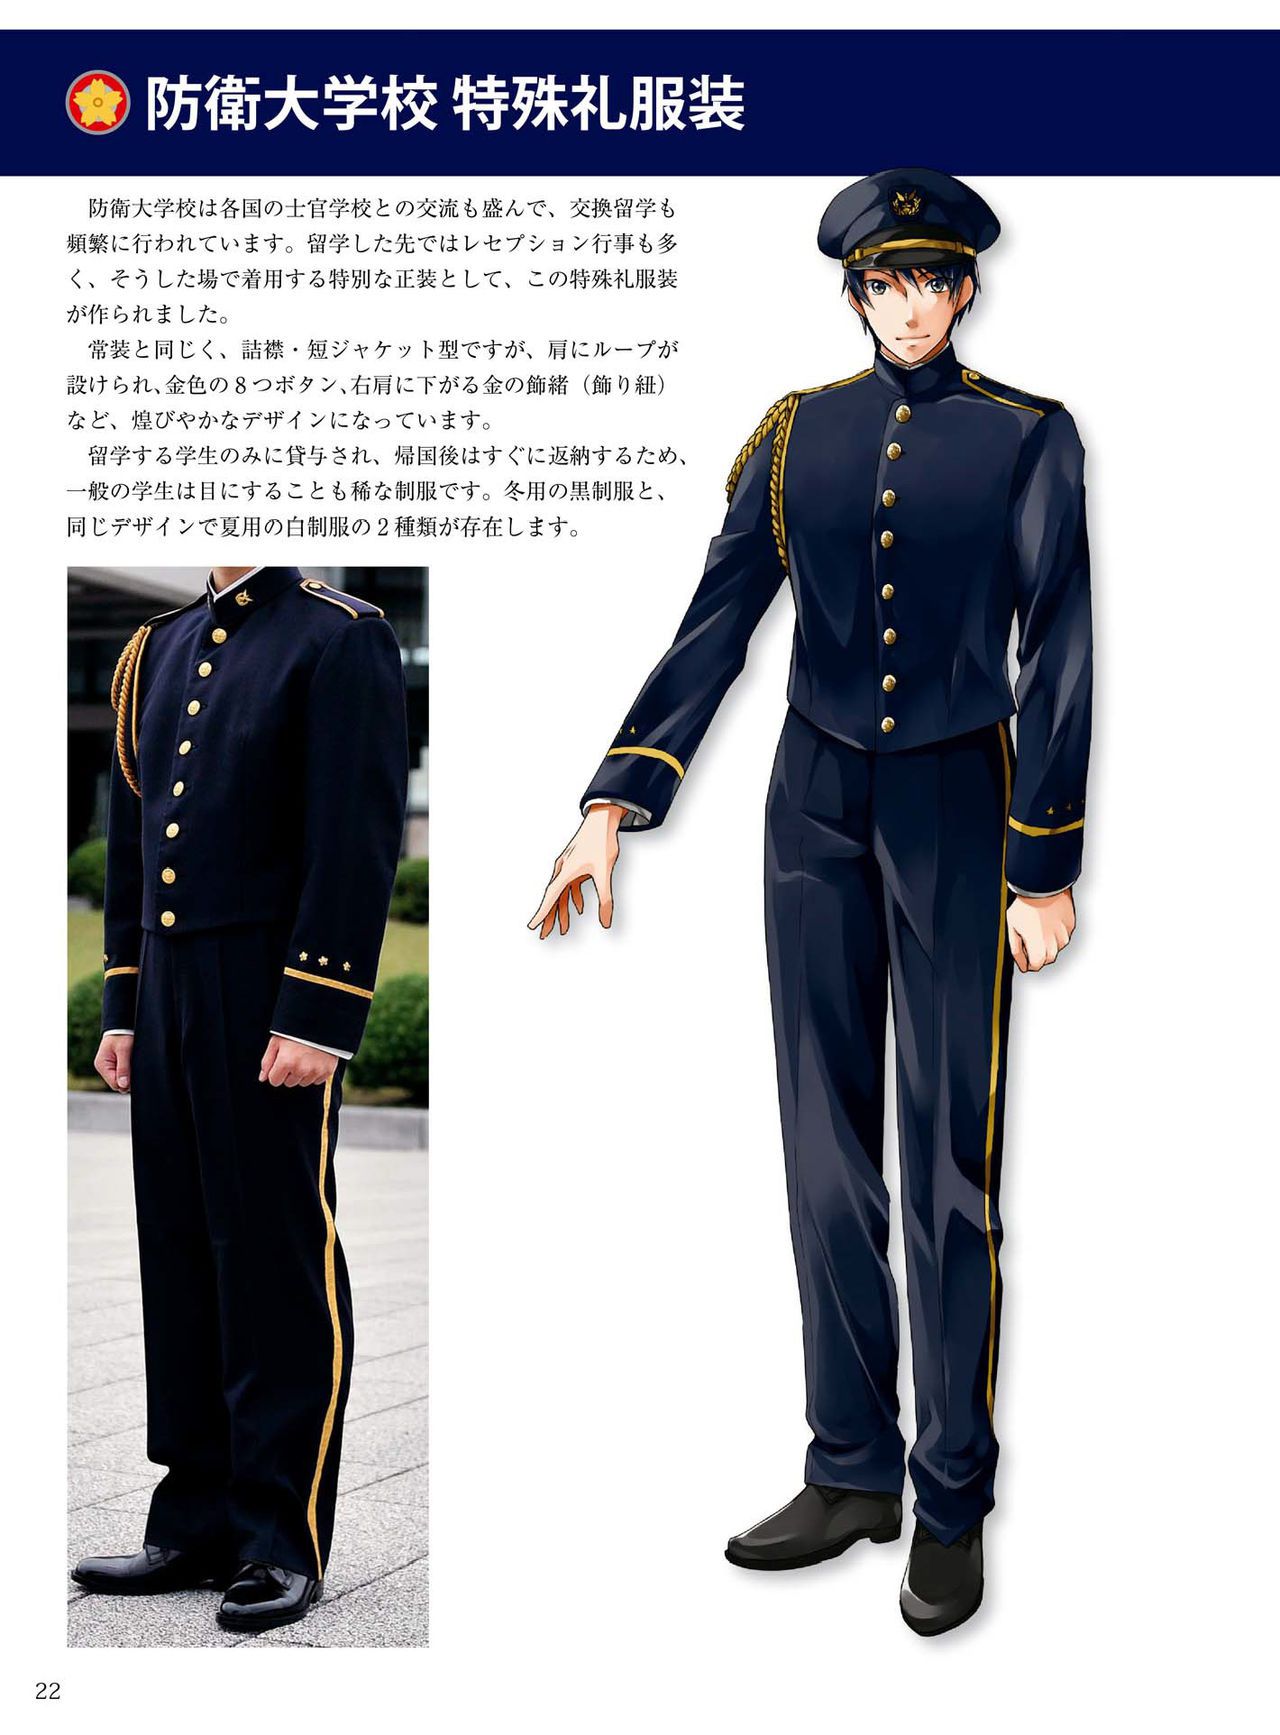 How to draw military uniforms and uniforms From Self-Defense Forces 軍服・制服の描き方 アメリカ軍・自衛隊の制服から戦闘服まで 25